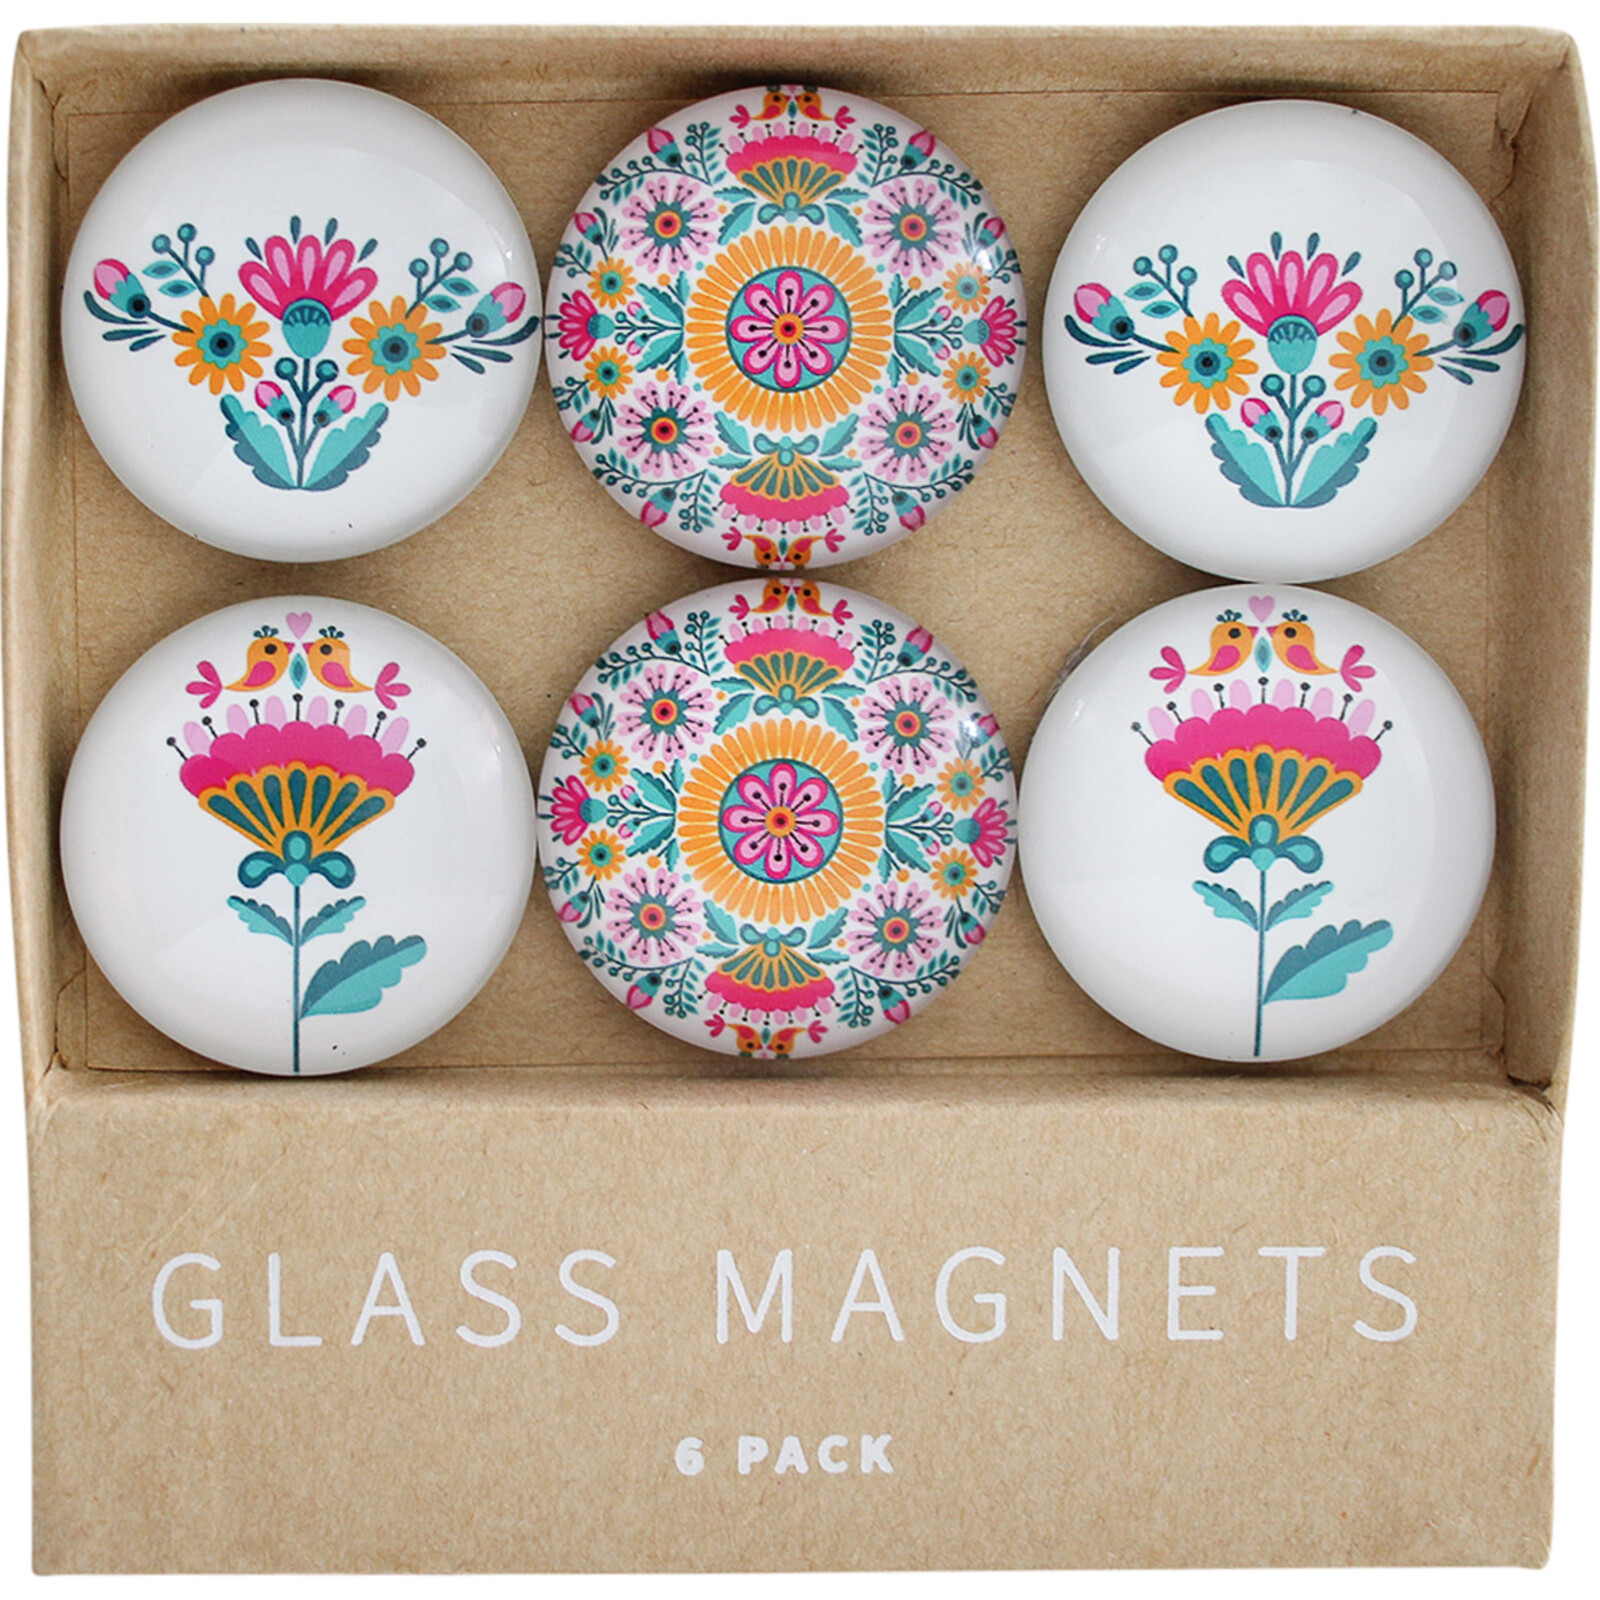 Glass Magnets FolksieS/6